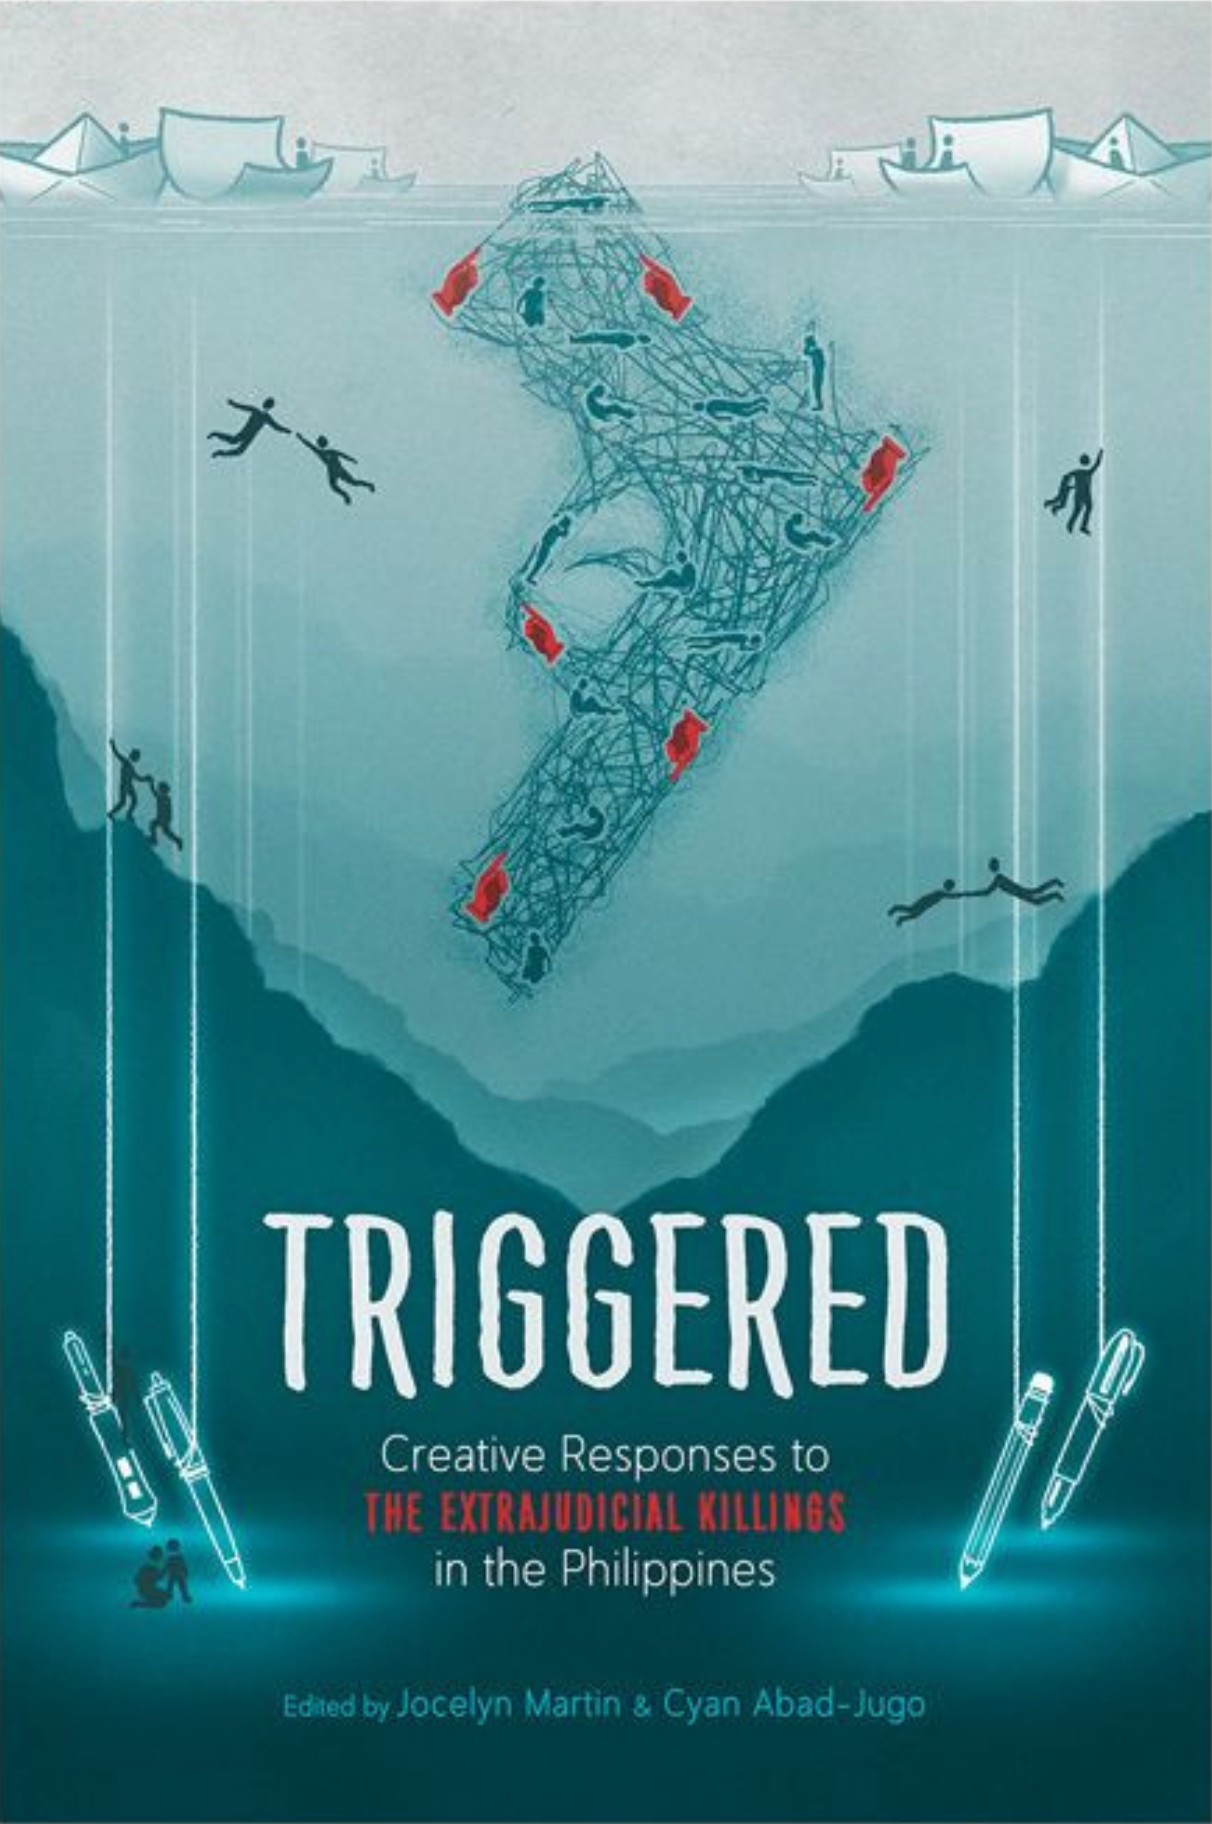 Triggered: Creative Responses to Extra-Judicial Killings in The Philippines